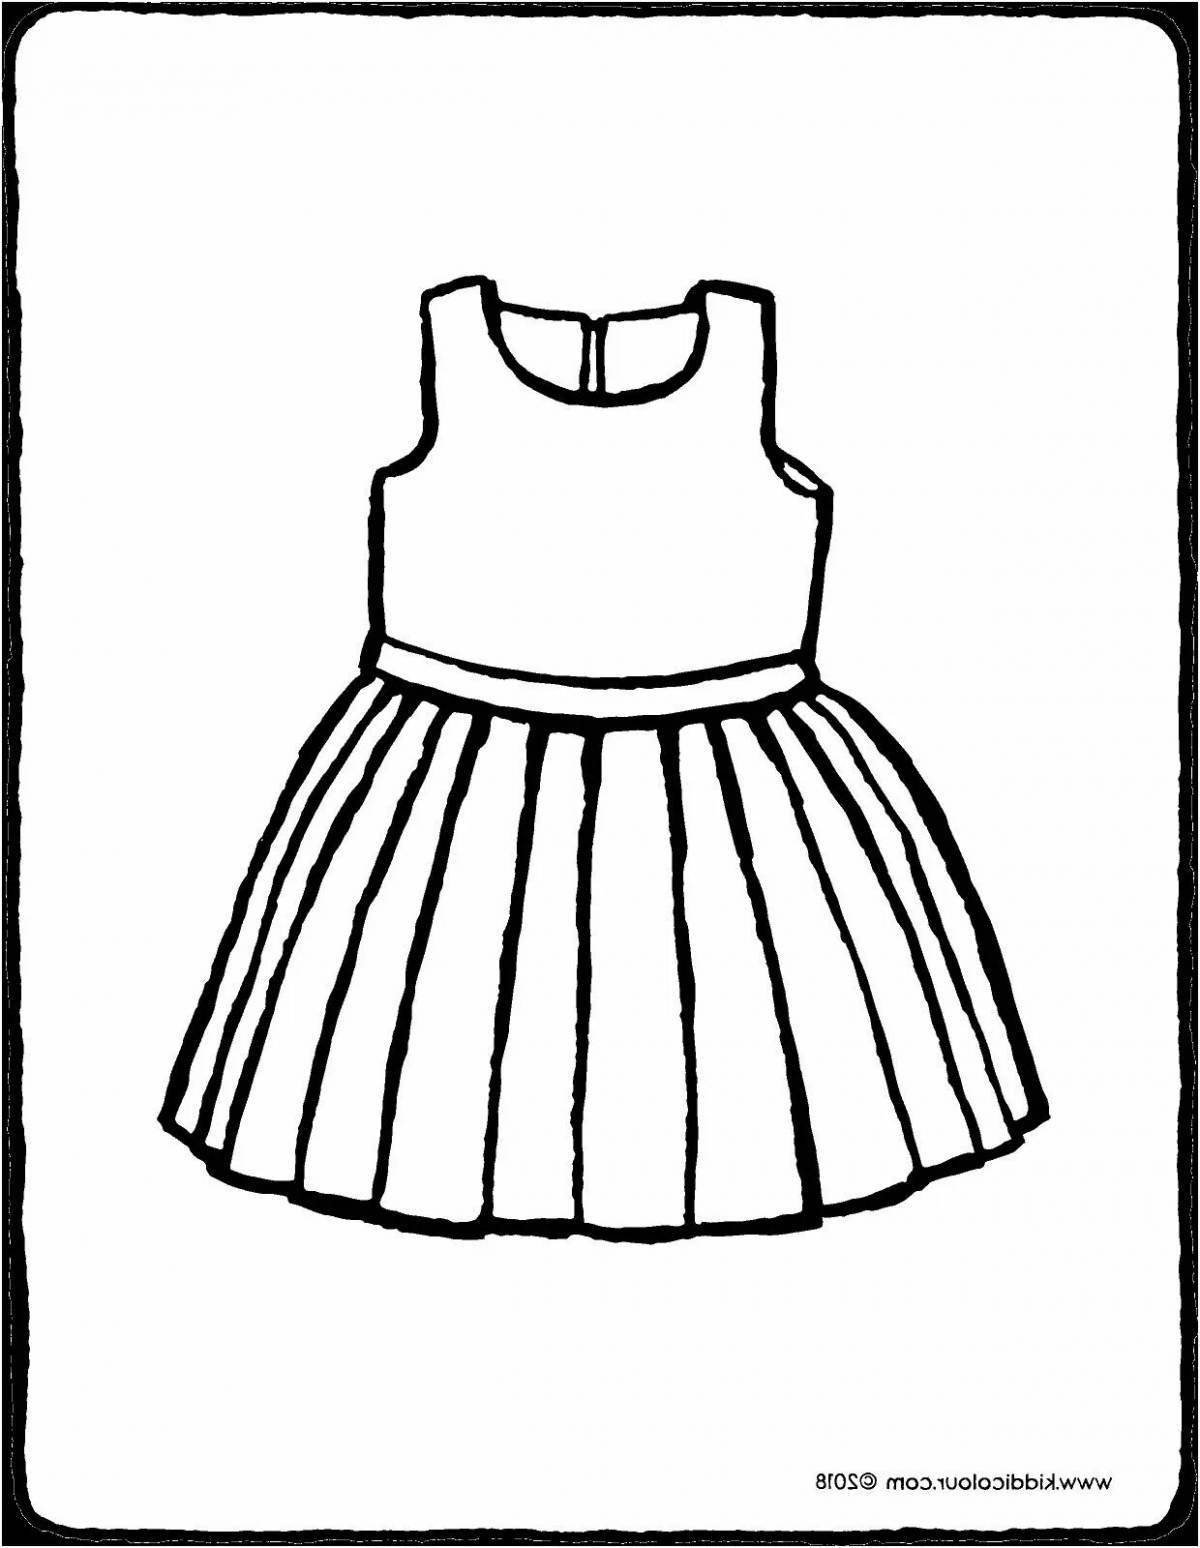 Coloring dress for children 5-6 years old